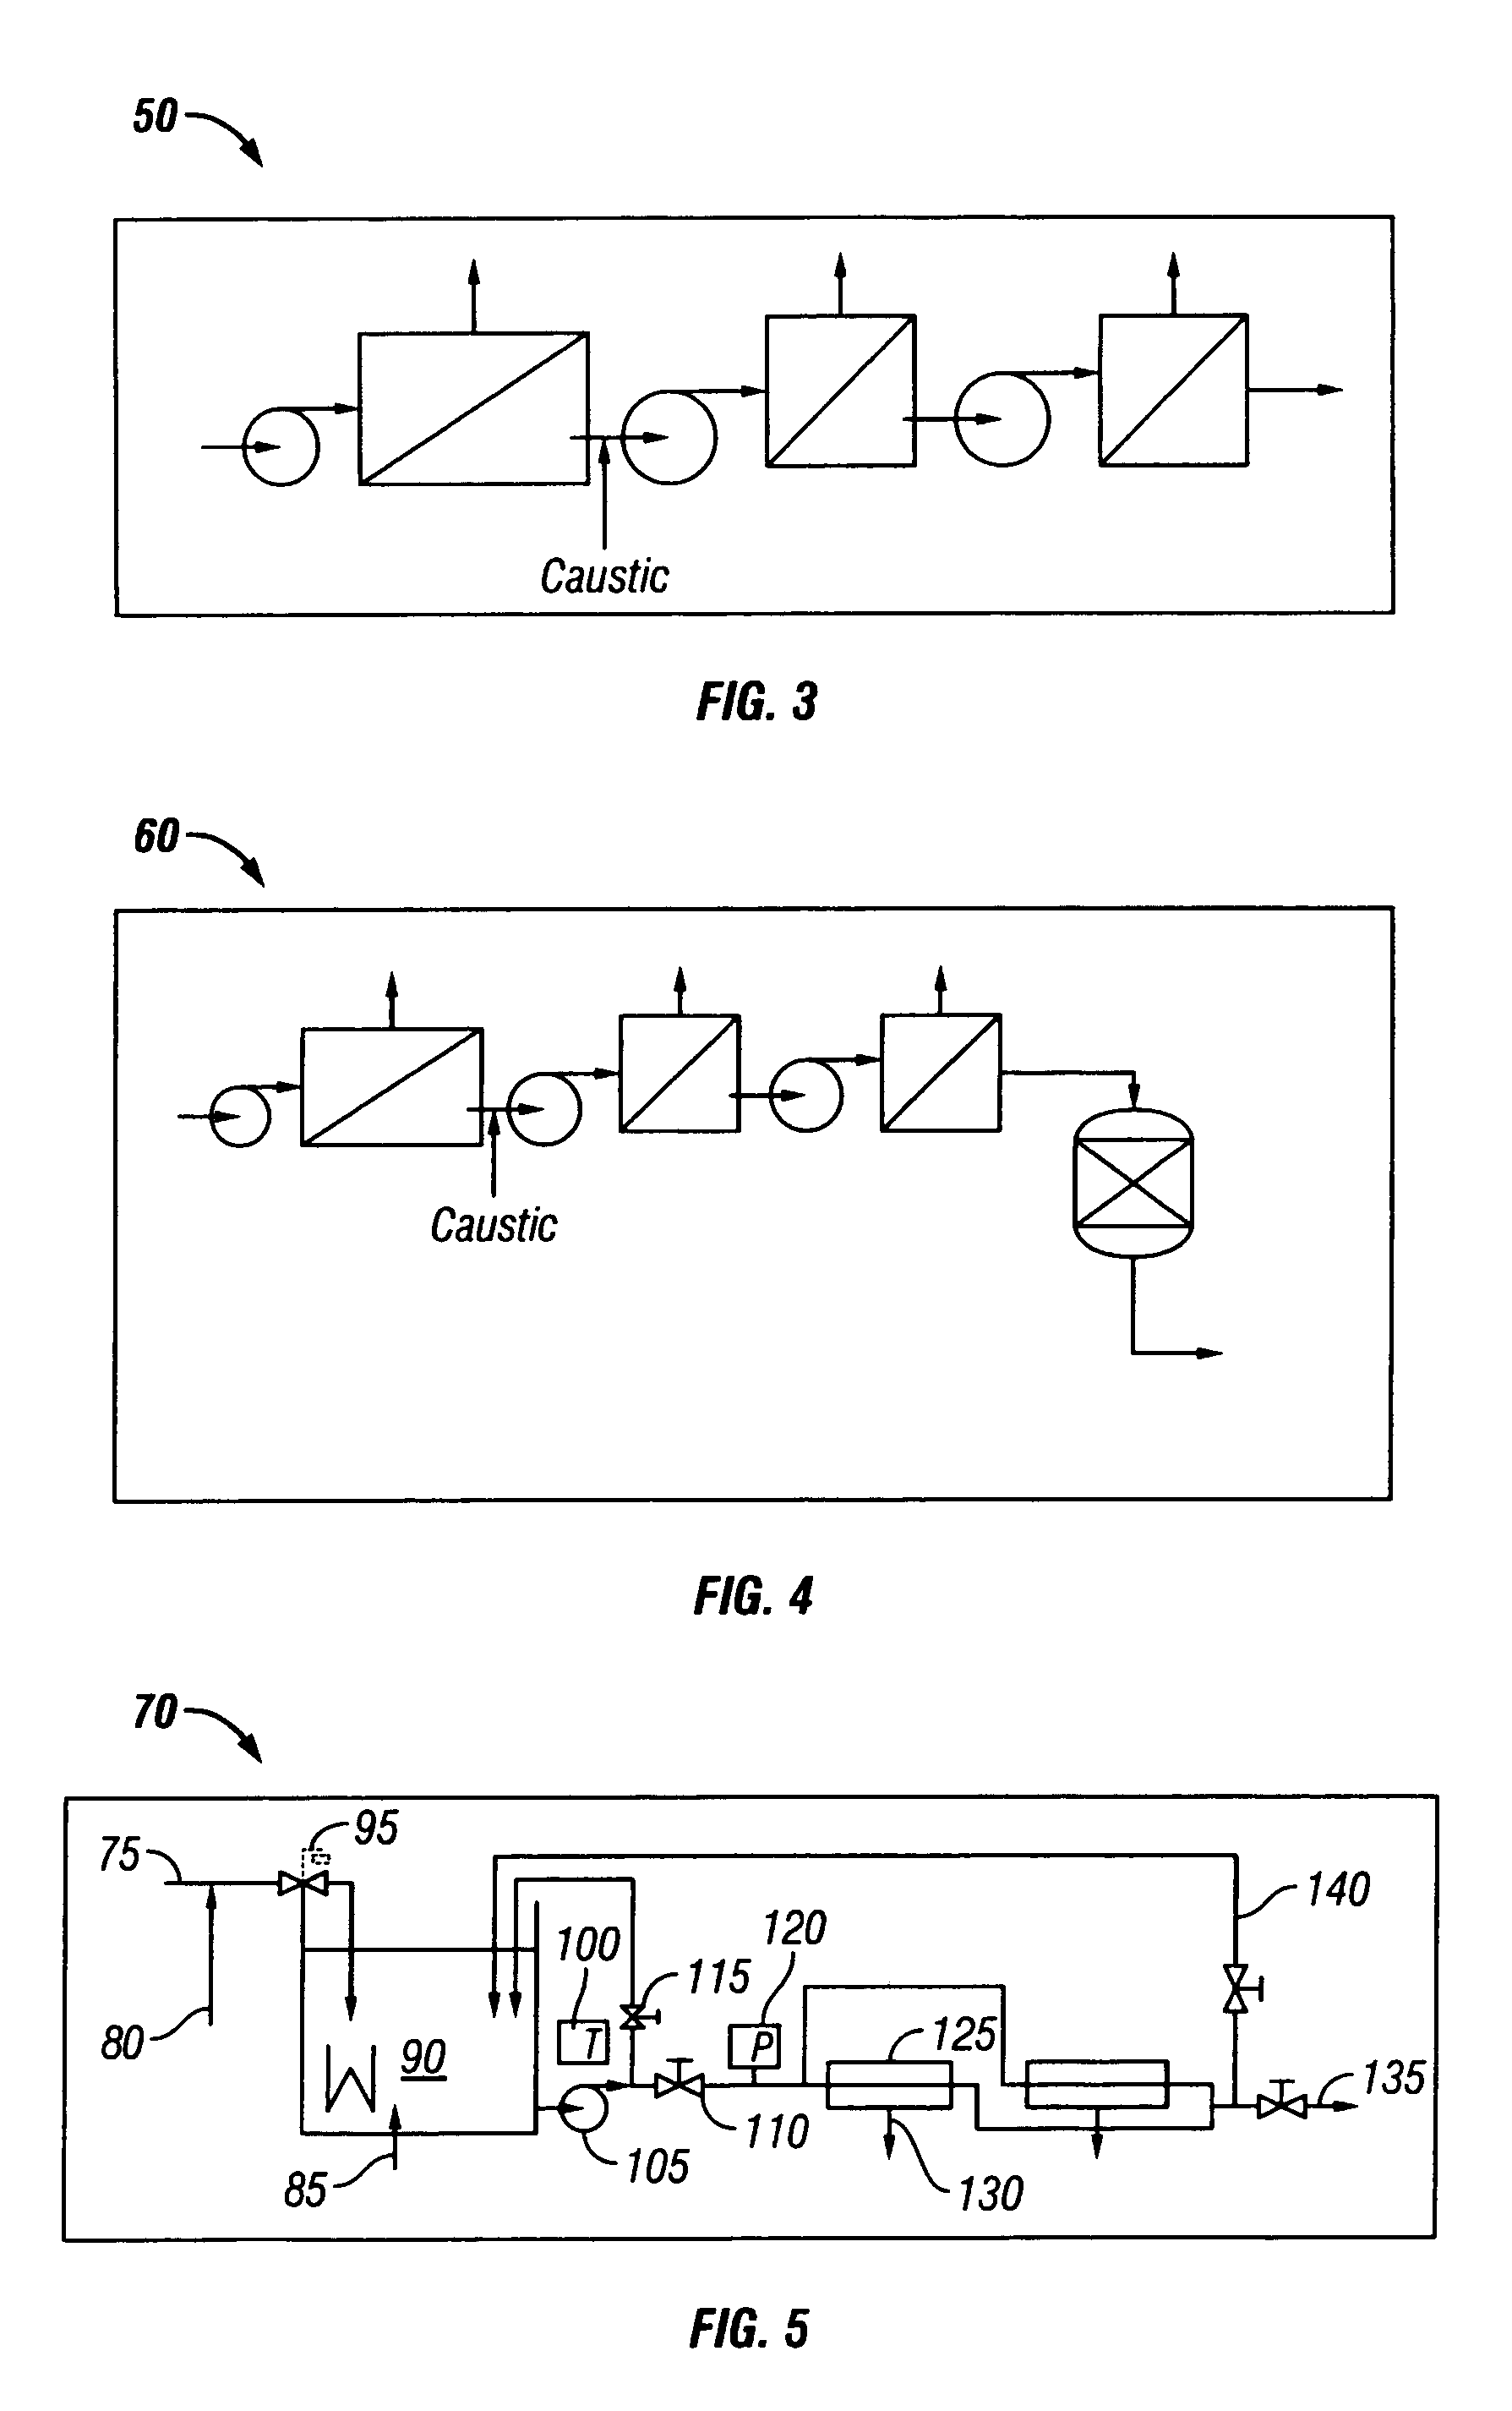 Method of treating reverse osmosis membranes for boron rejection enhancement